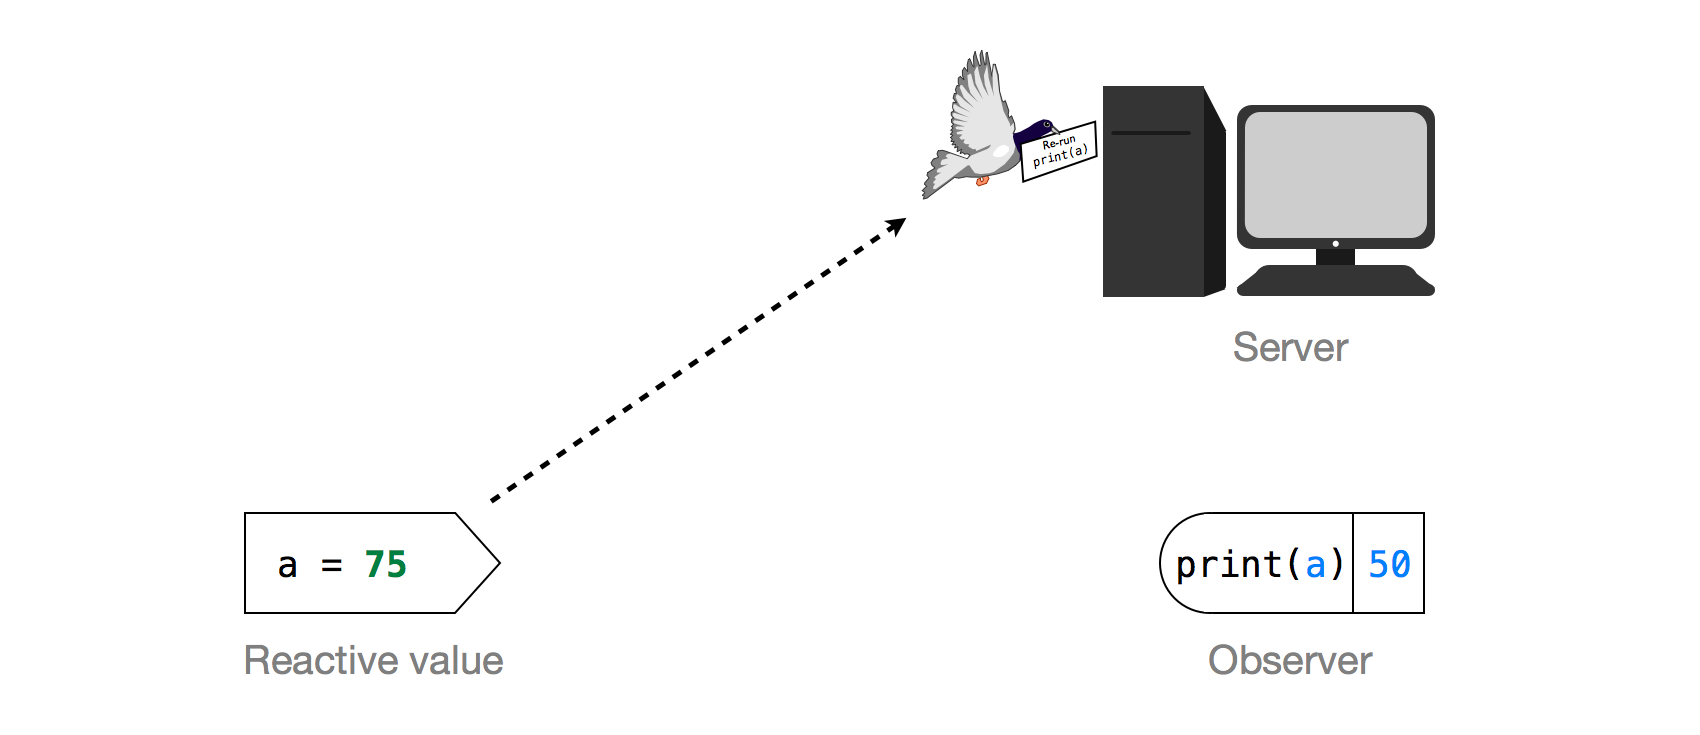 Image of Reactive value, Observer and Server. Reactive value changes from 50 to 75. Pigeon holding card saying Re-run print(a) flies from Reactive value to Server.